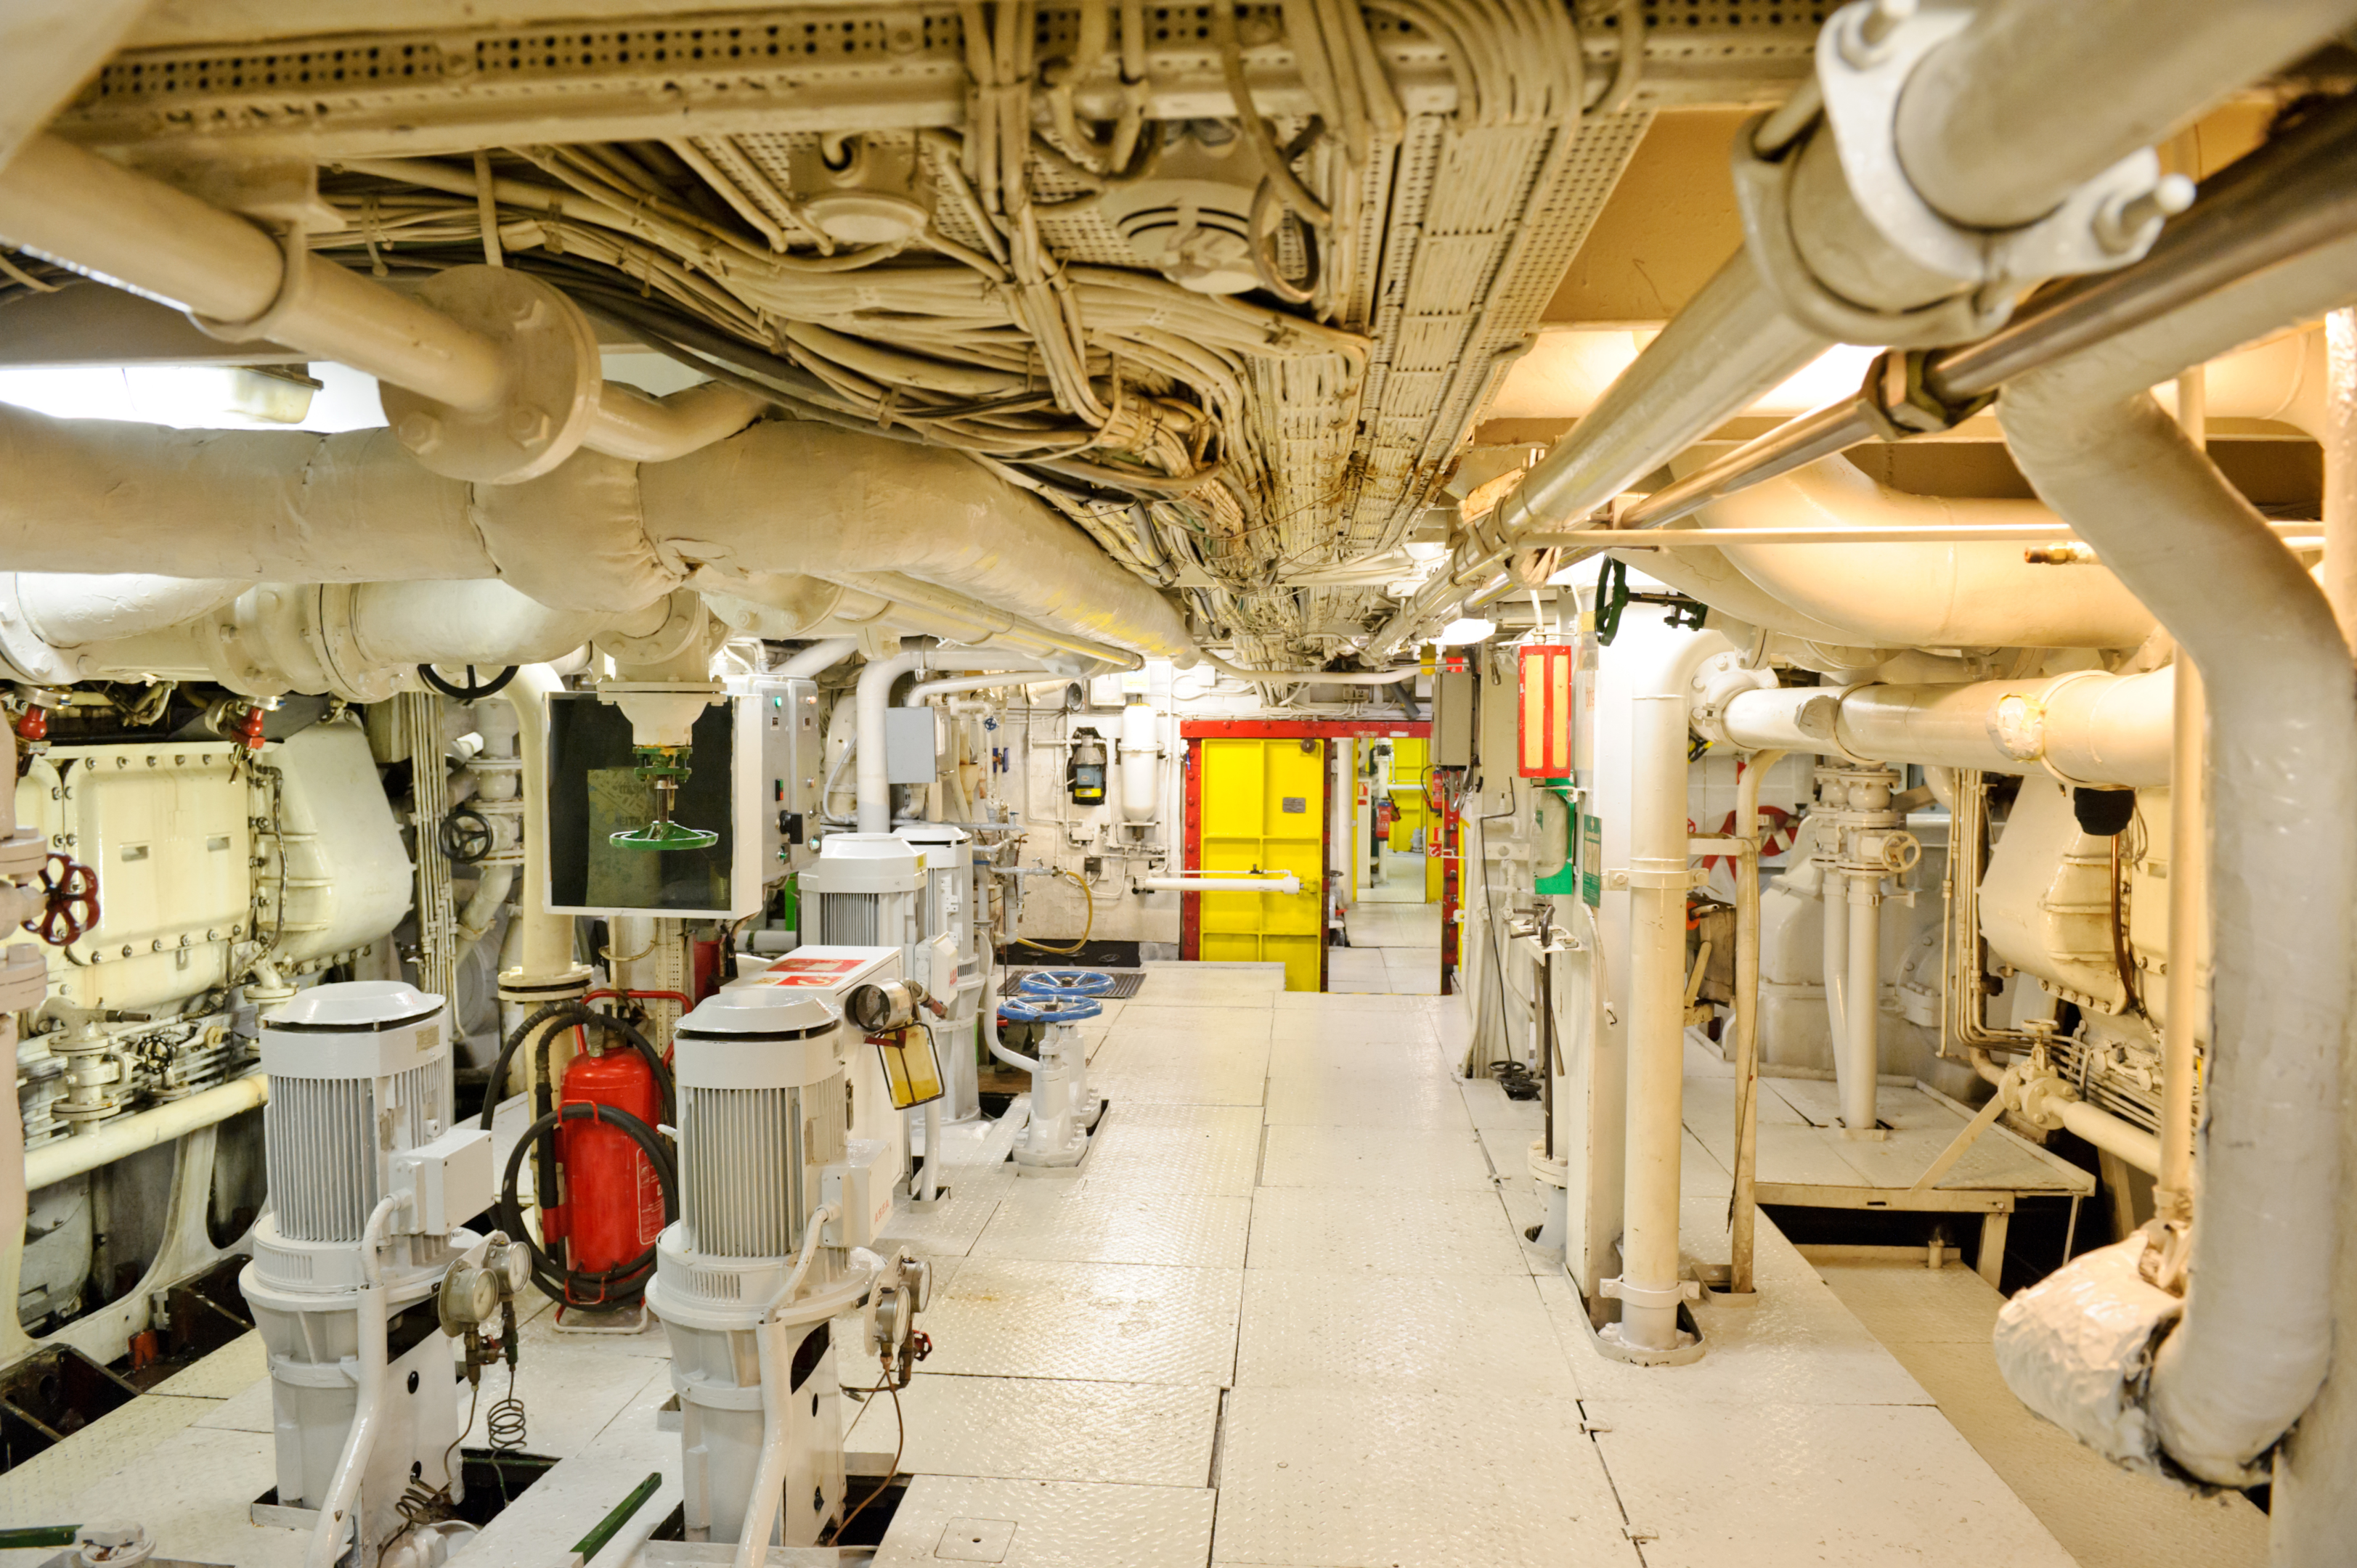 A boat engine room